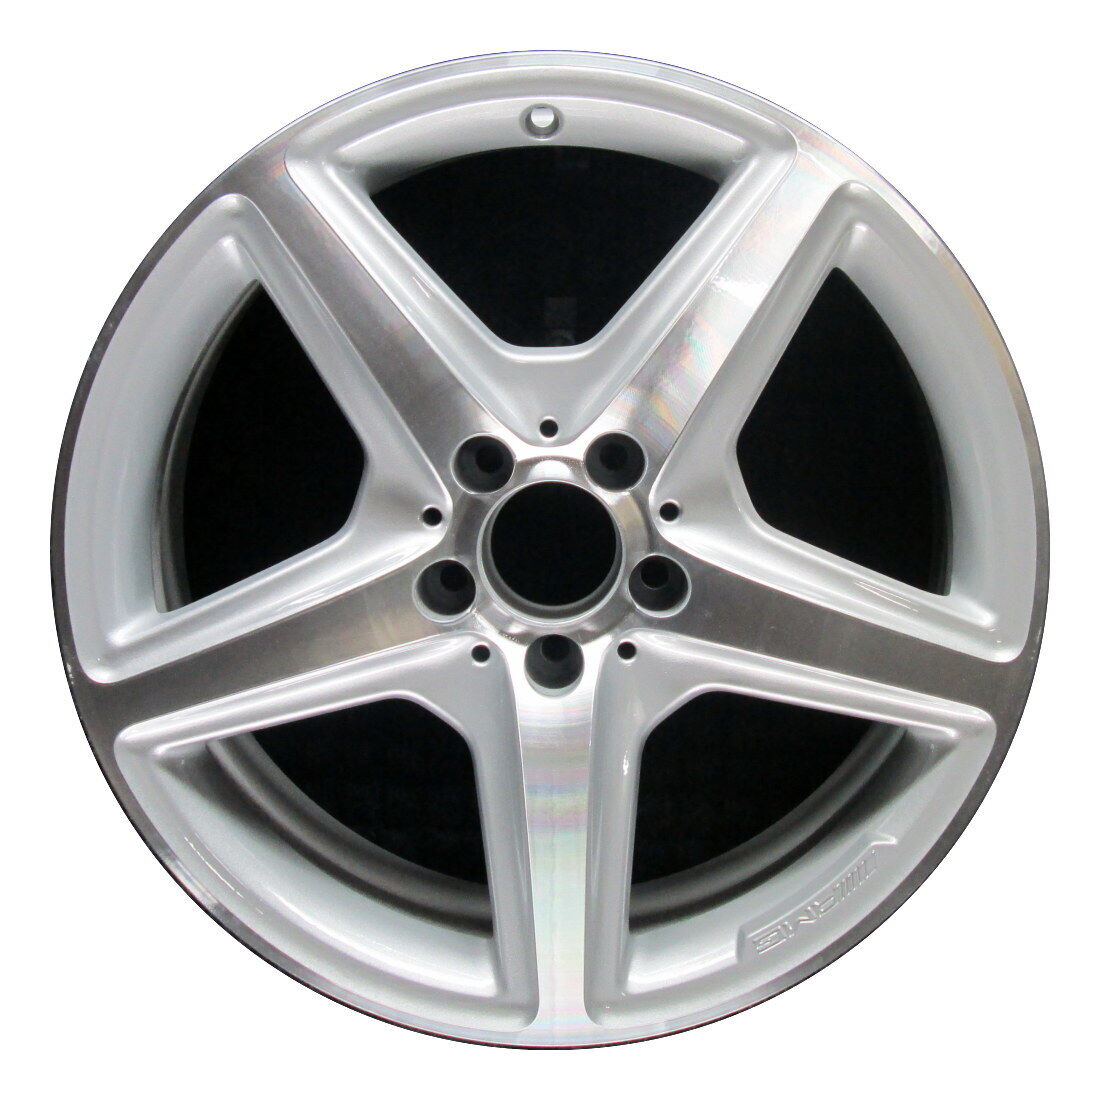 Wheel Rim Mercedes-Benz CLS Class CLS400 CLS550 CLS63 AMG Rear Silver OE 85231